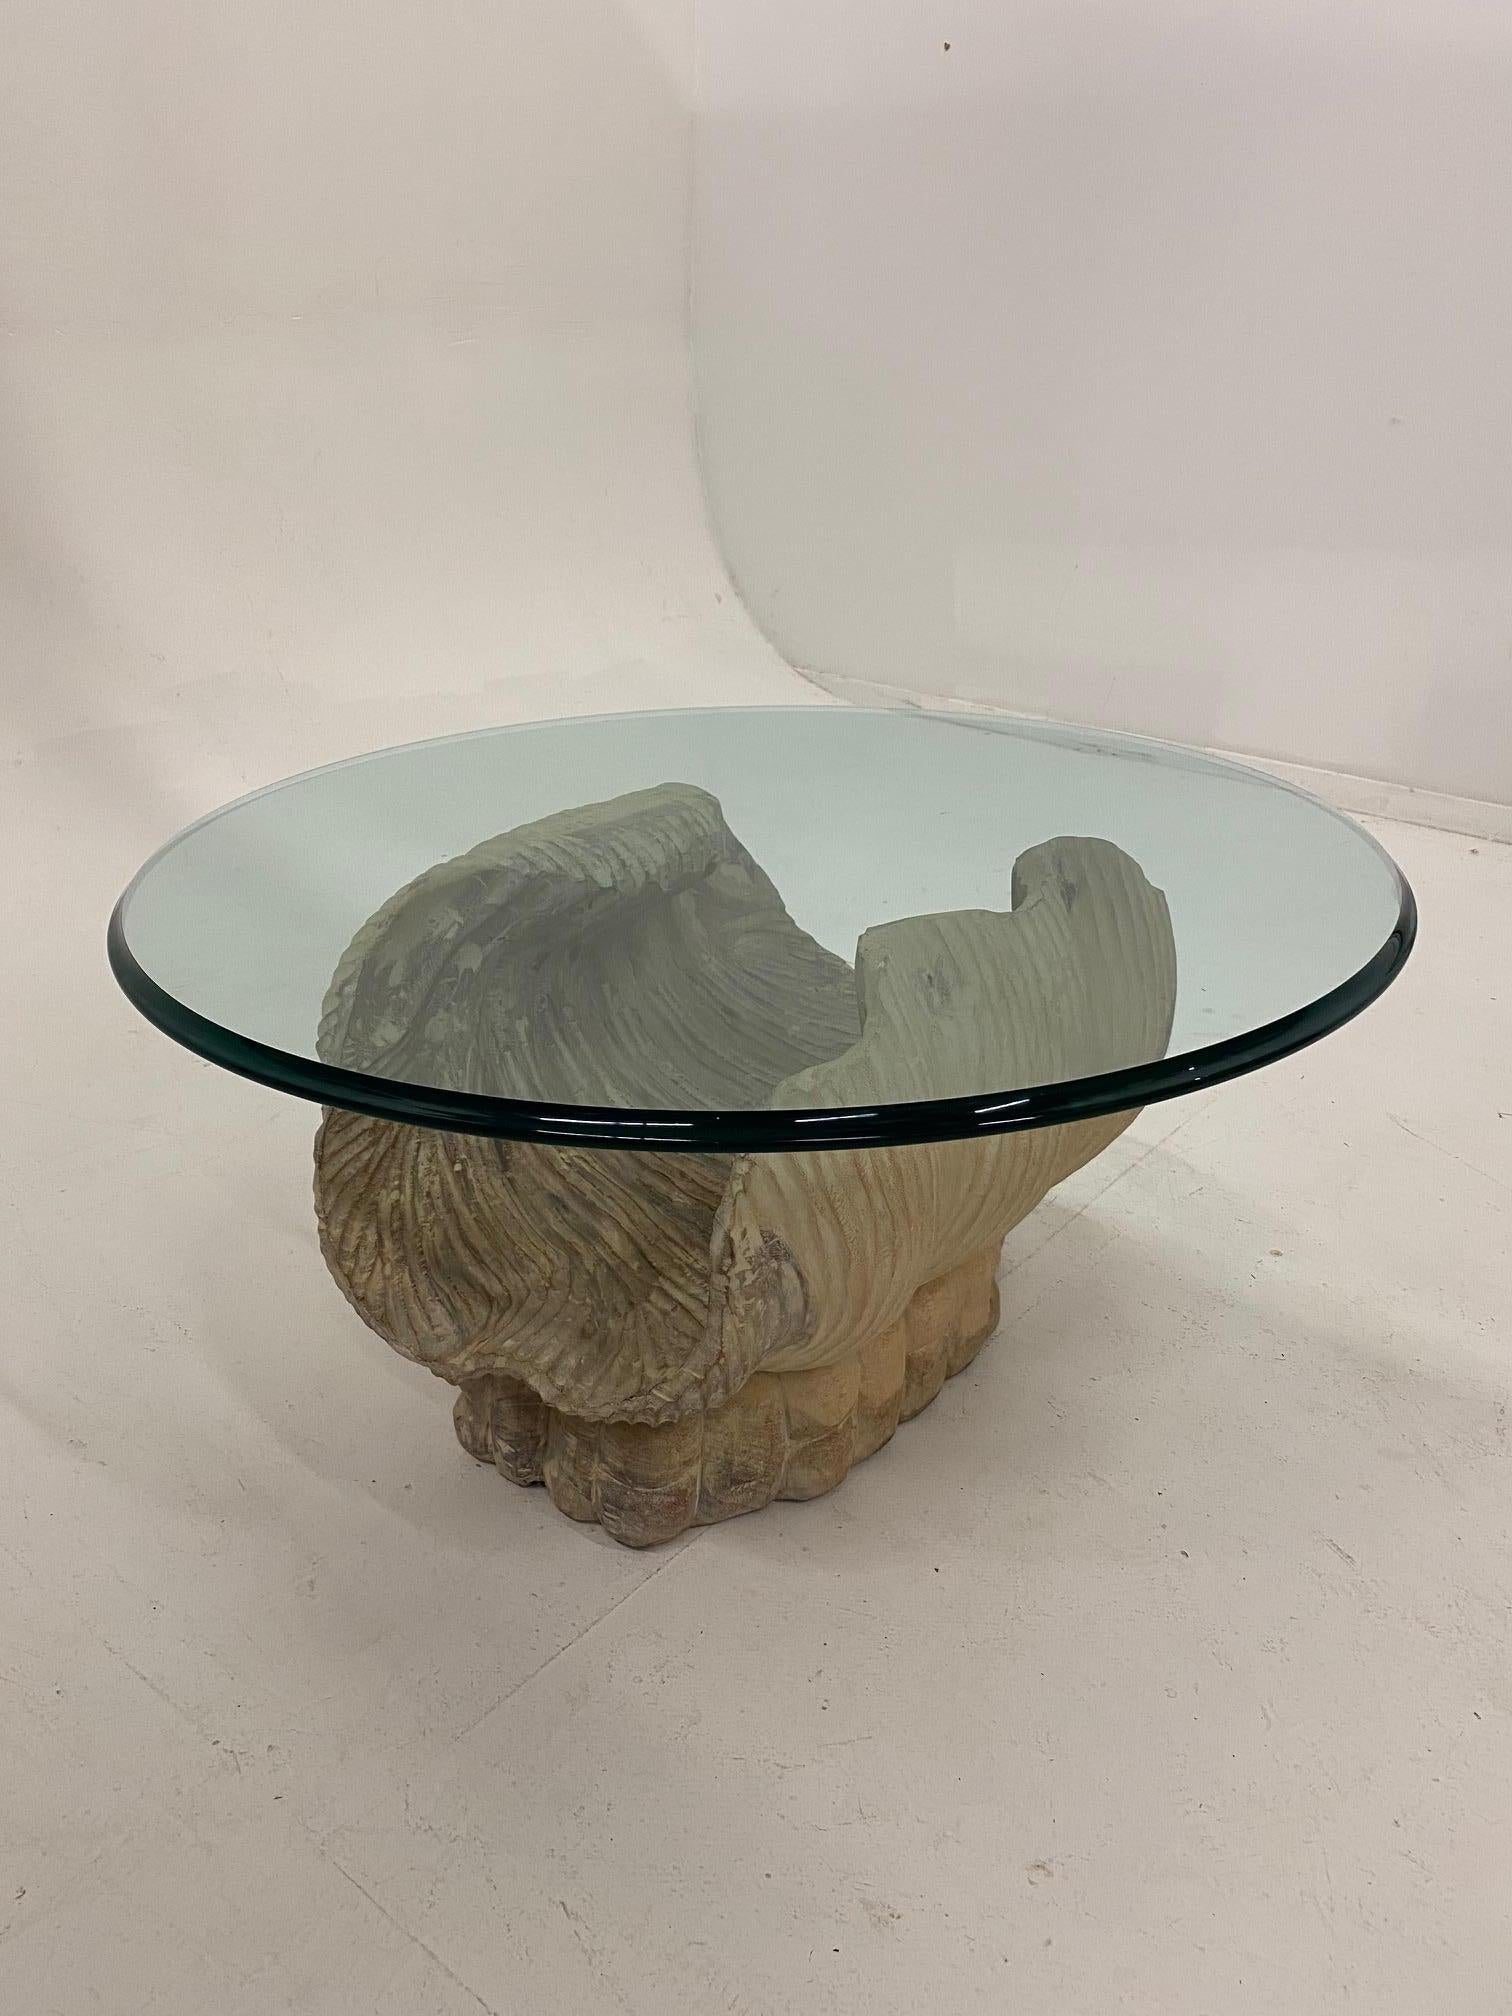 Italian 1960s hand carved wood that looks like a monumental shell having a natural faux finish.
Glass is substantial, 5/8